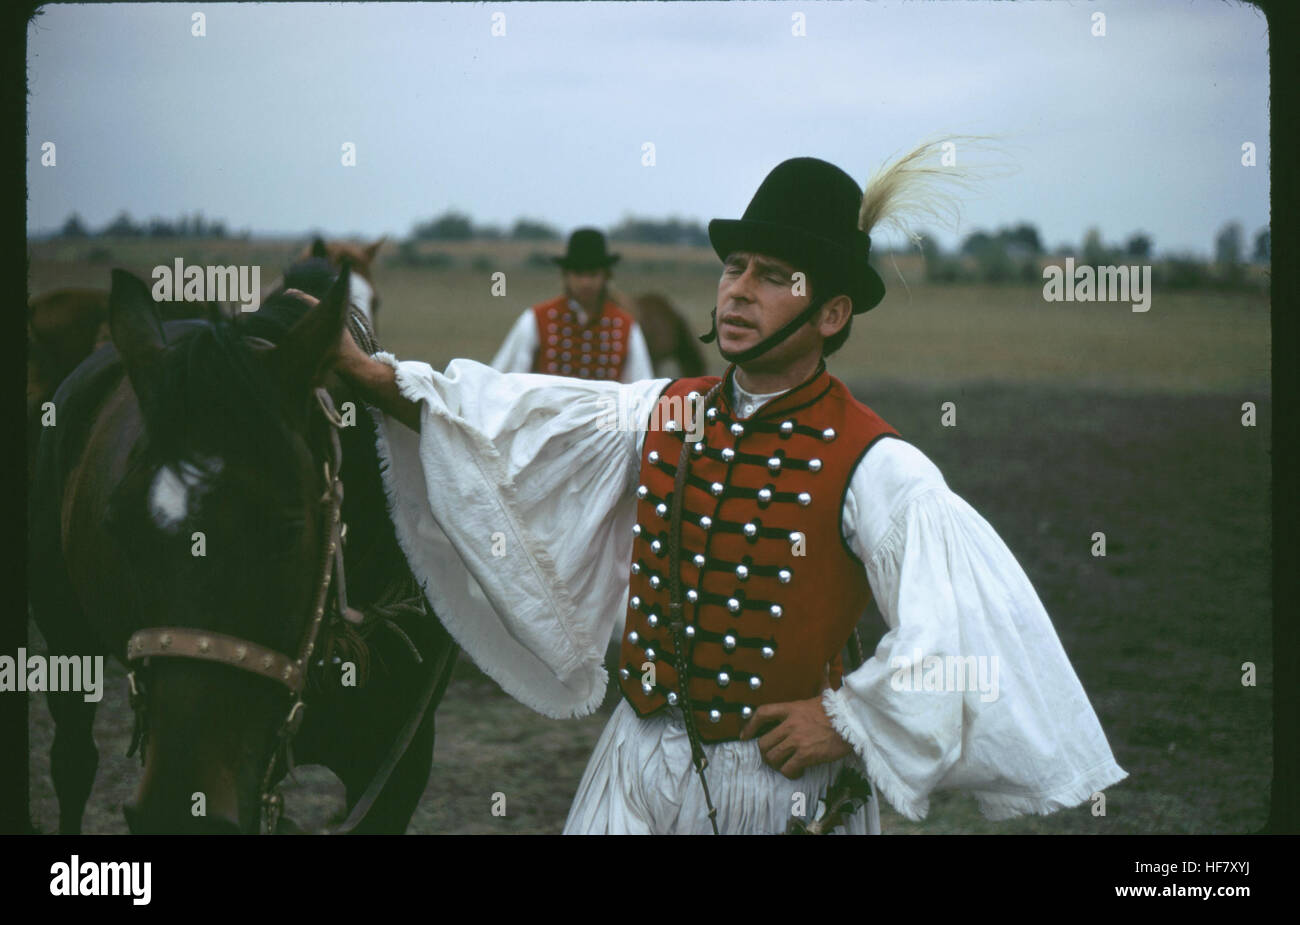 Horseman in flamboyant traditional outfit of the Puszta, Hungary. Stock Photo